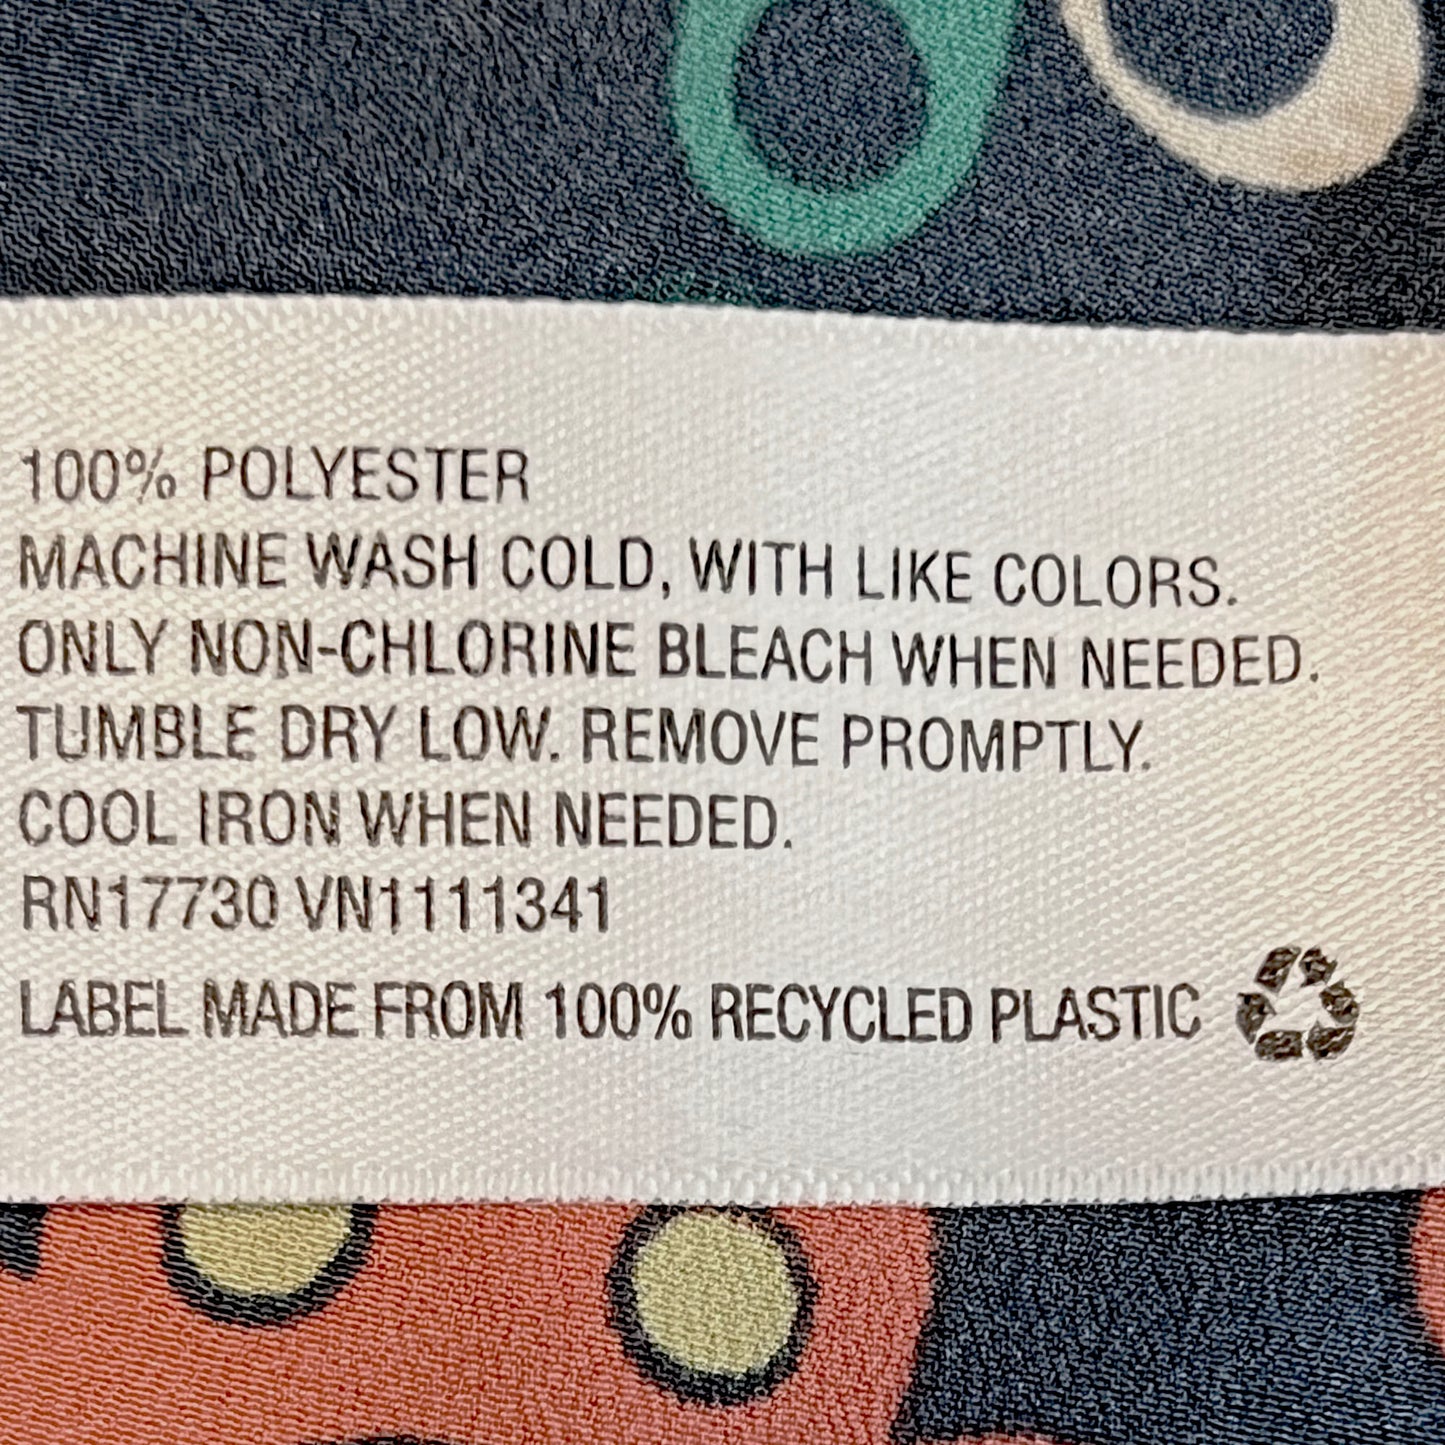 Merona-Label-with-care-instructions